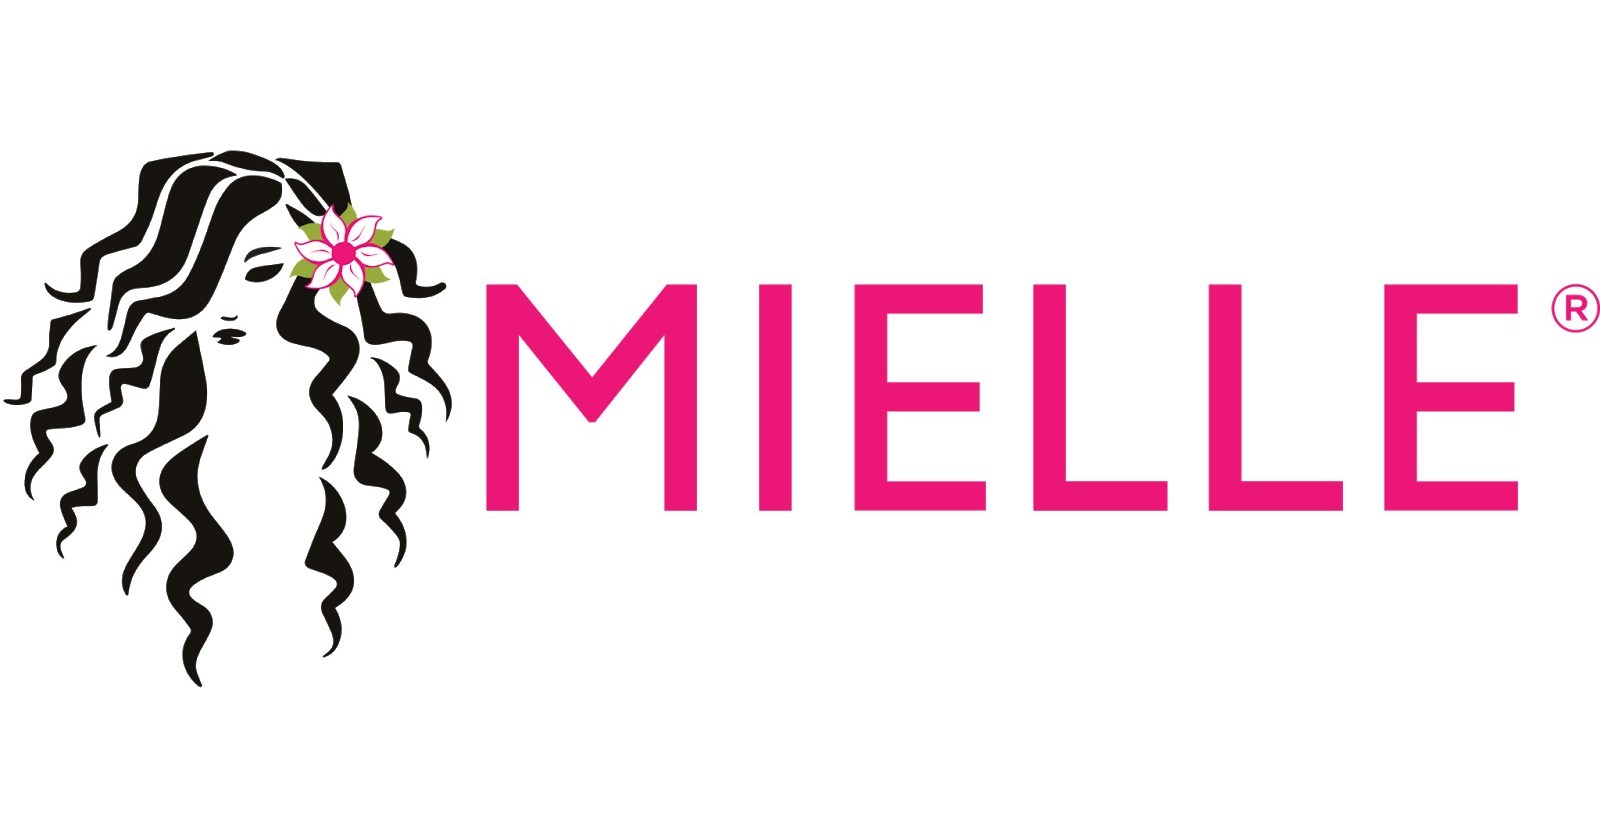 Mielle 10 year Anniversary Sale, all items 7$ $7